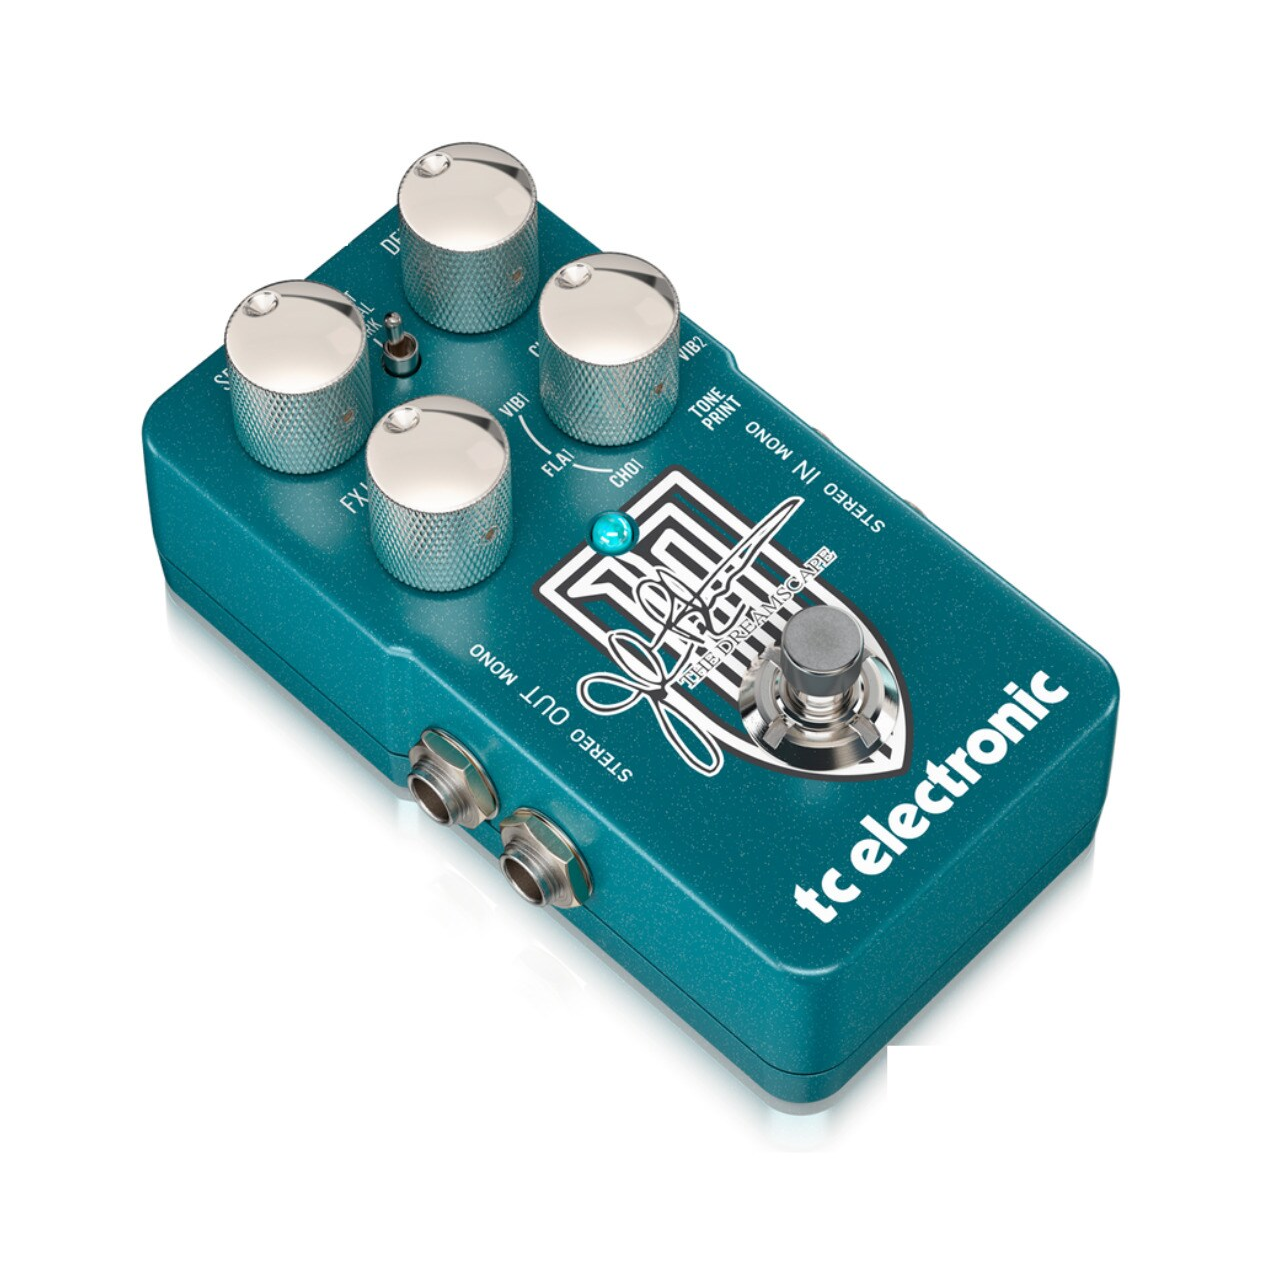 Pedal Multiefecto Para Guitarra Tc Electronic TheDreamscape